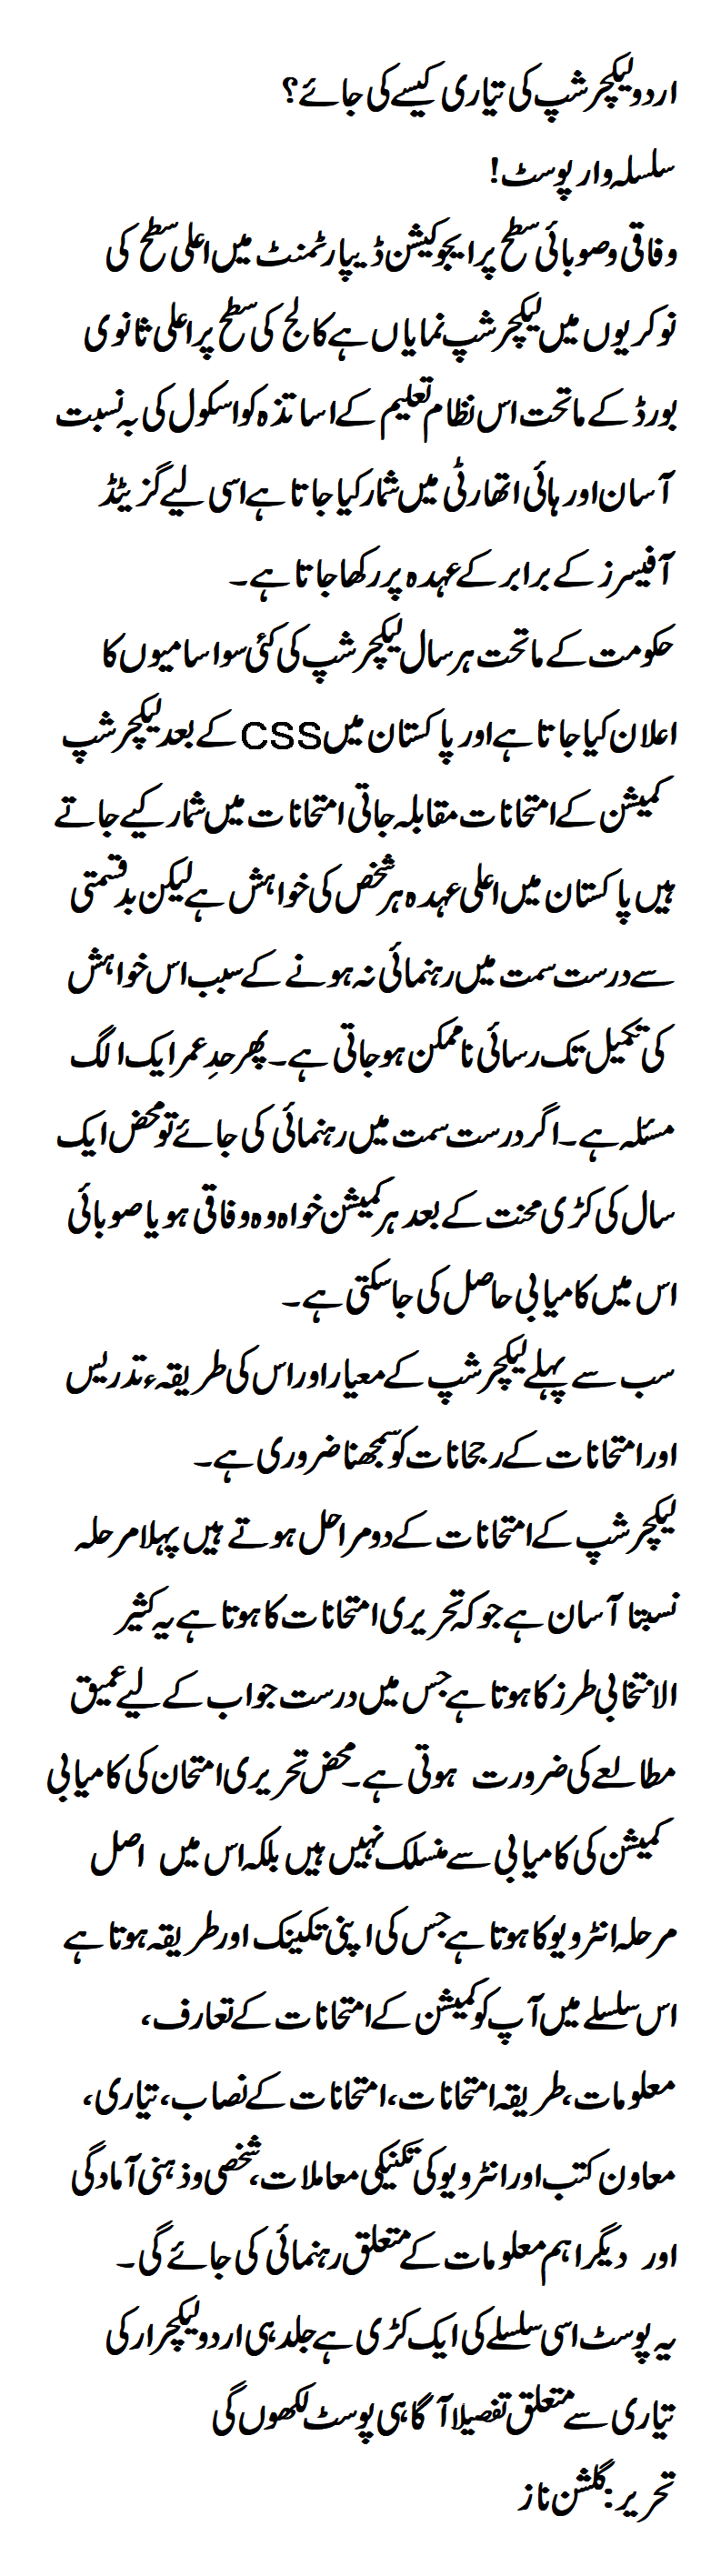 How to prepare for Urdu Lectureship